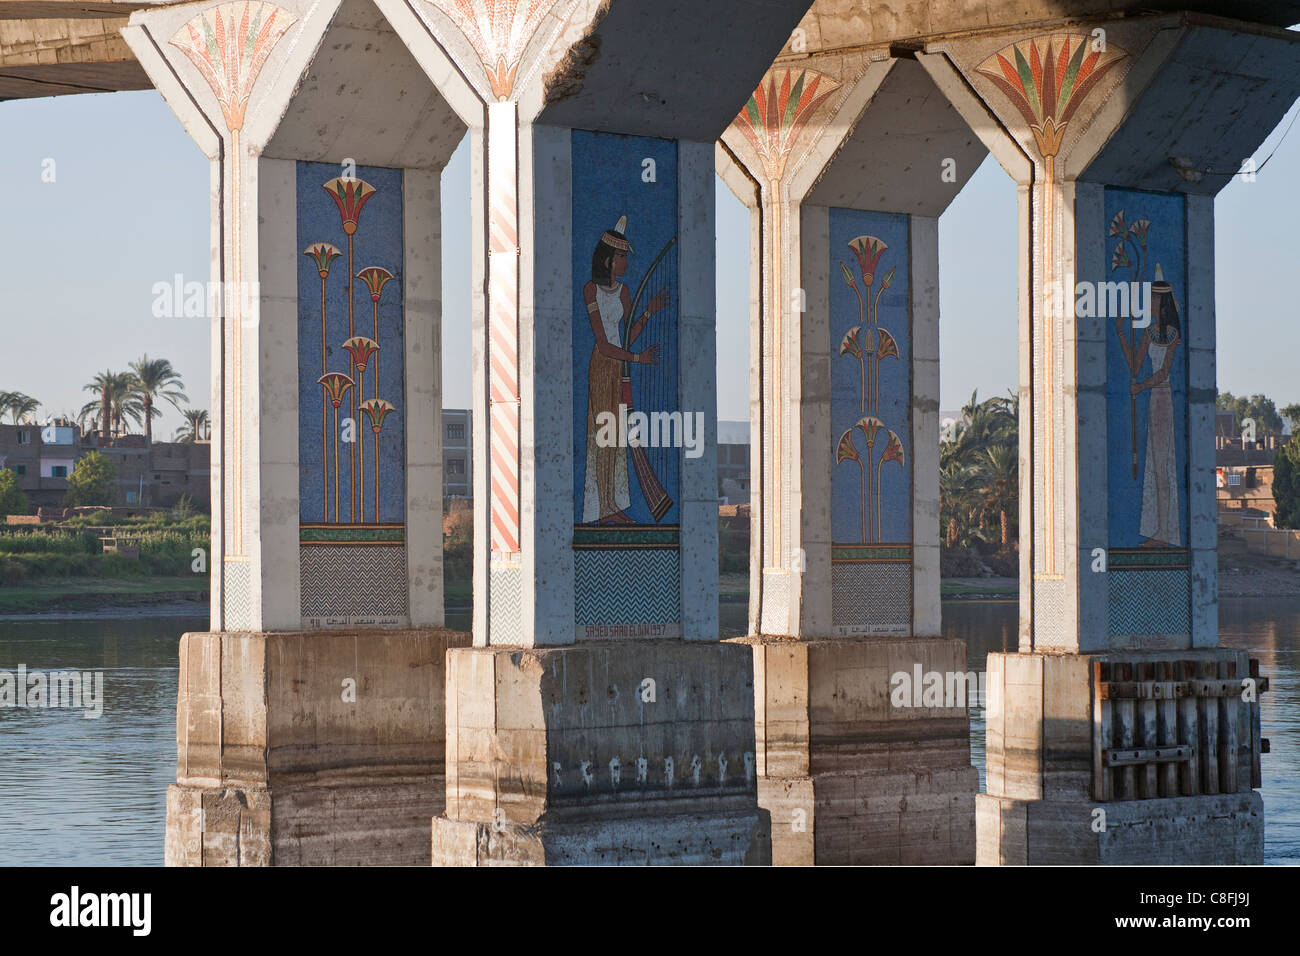 Passing close under Luxor bridge showing four pillars decorated with mosiac in Pharaonic style, Luxor, Egypt, Africa Stock Photo